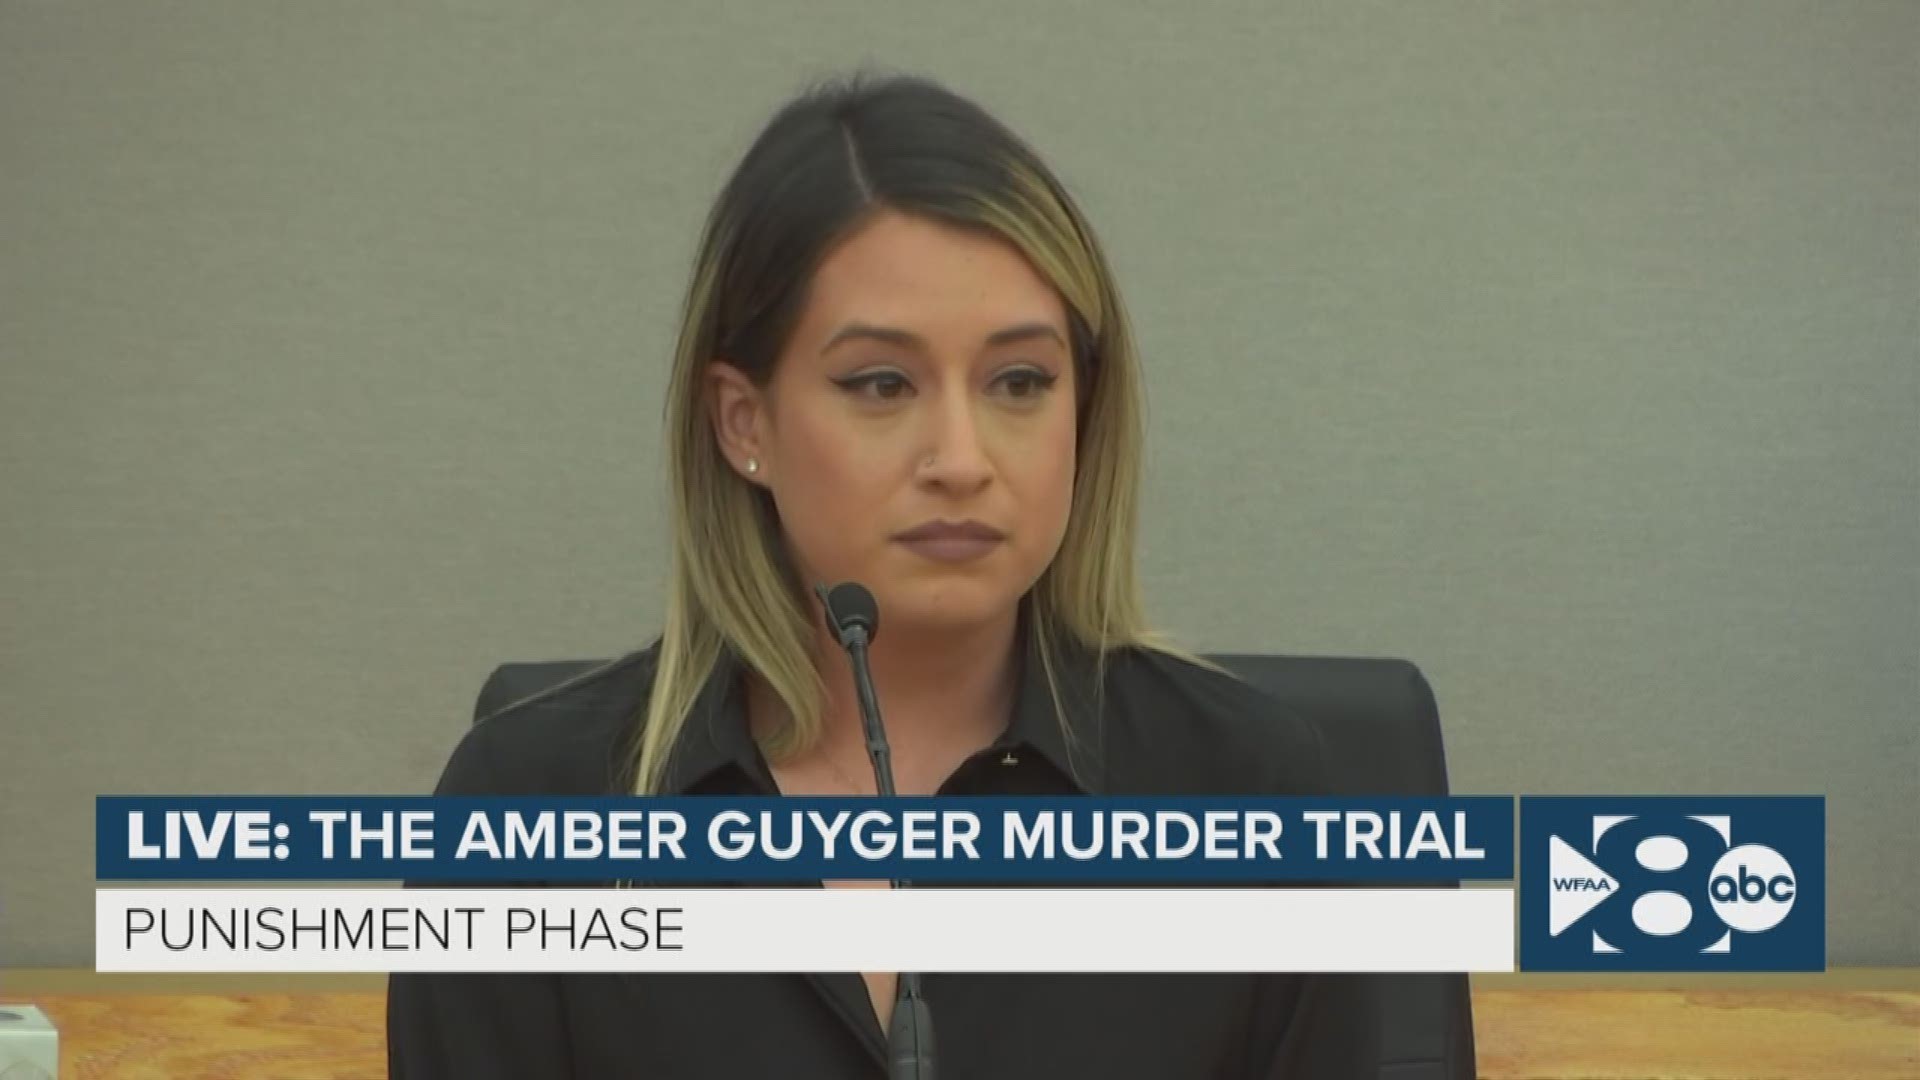 Maribel Chavez, a friend of Amber Guyger, took the stand Wednesday to testify during the punishment phase of the trial.